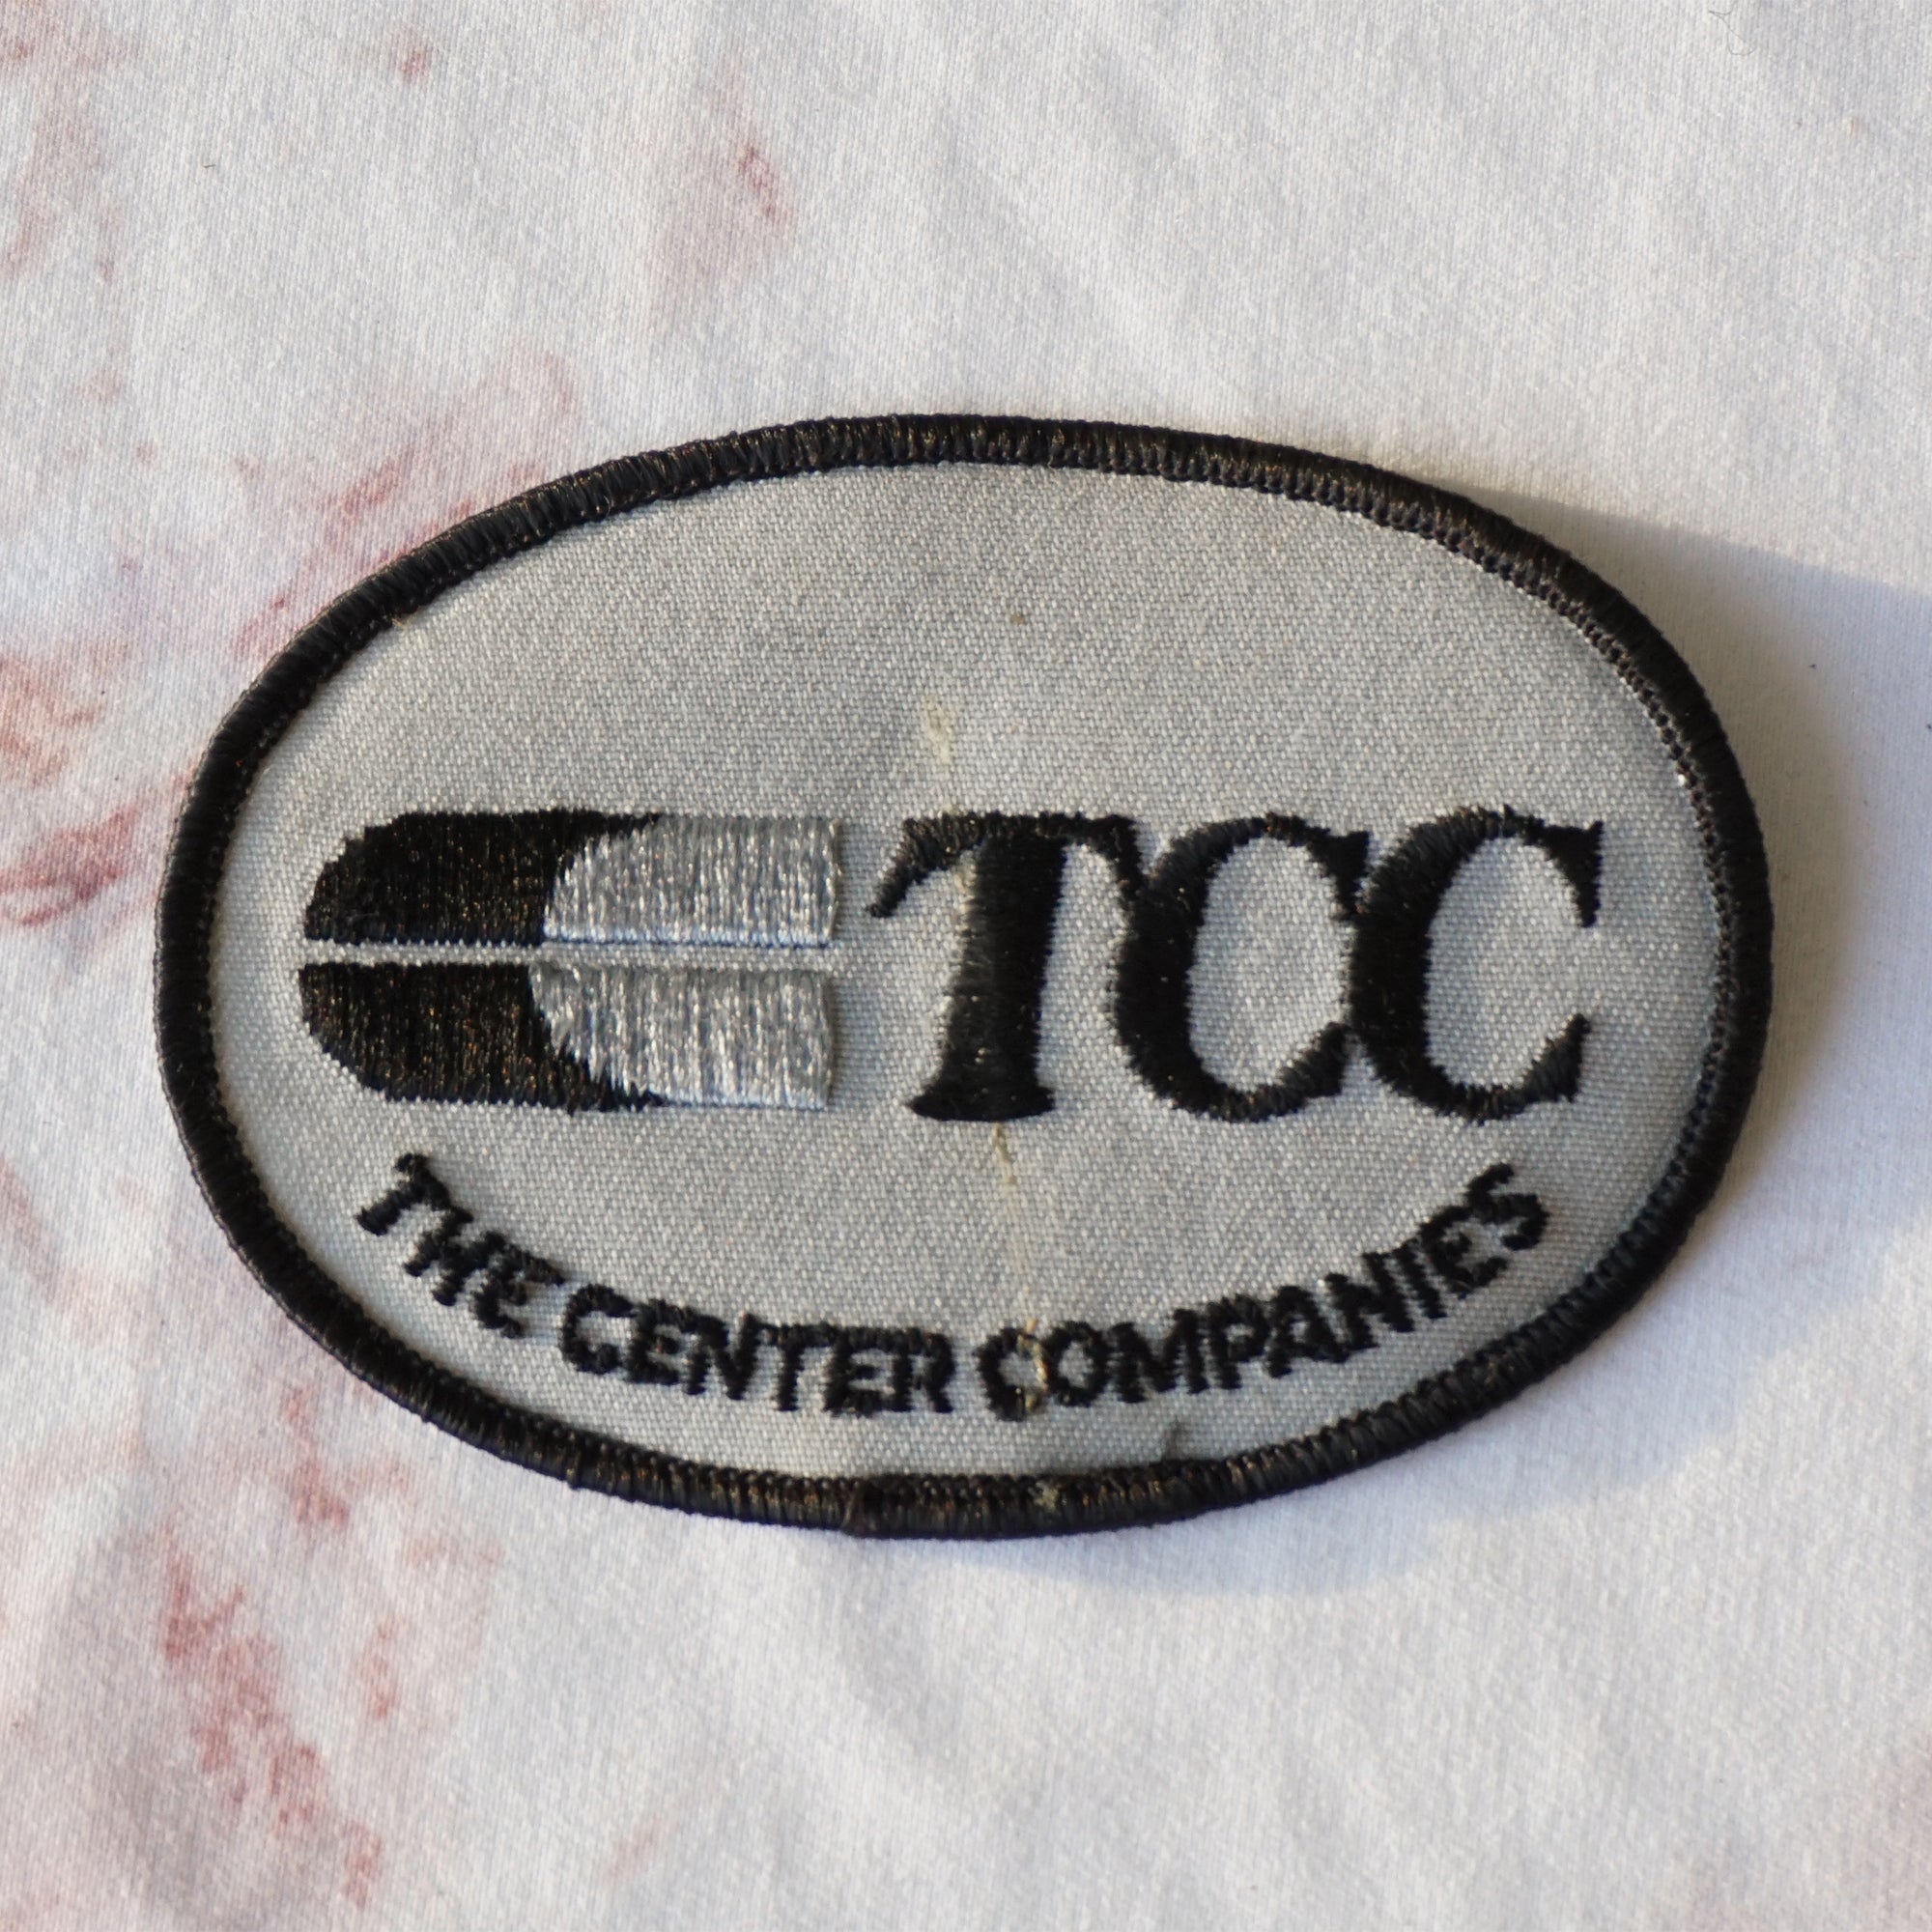 1980s Vintage 4" TCC The Center Companies Clothing Patch. Black and Grey Colors.